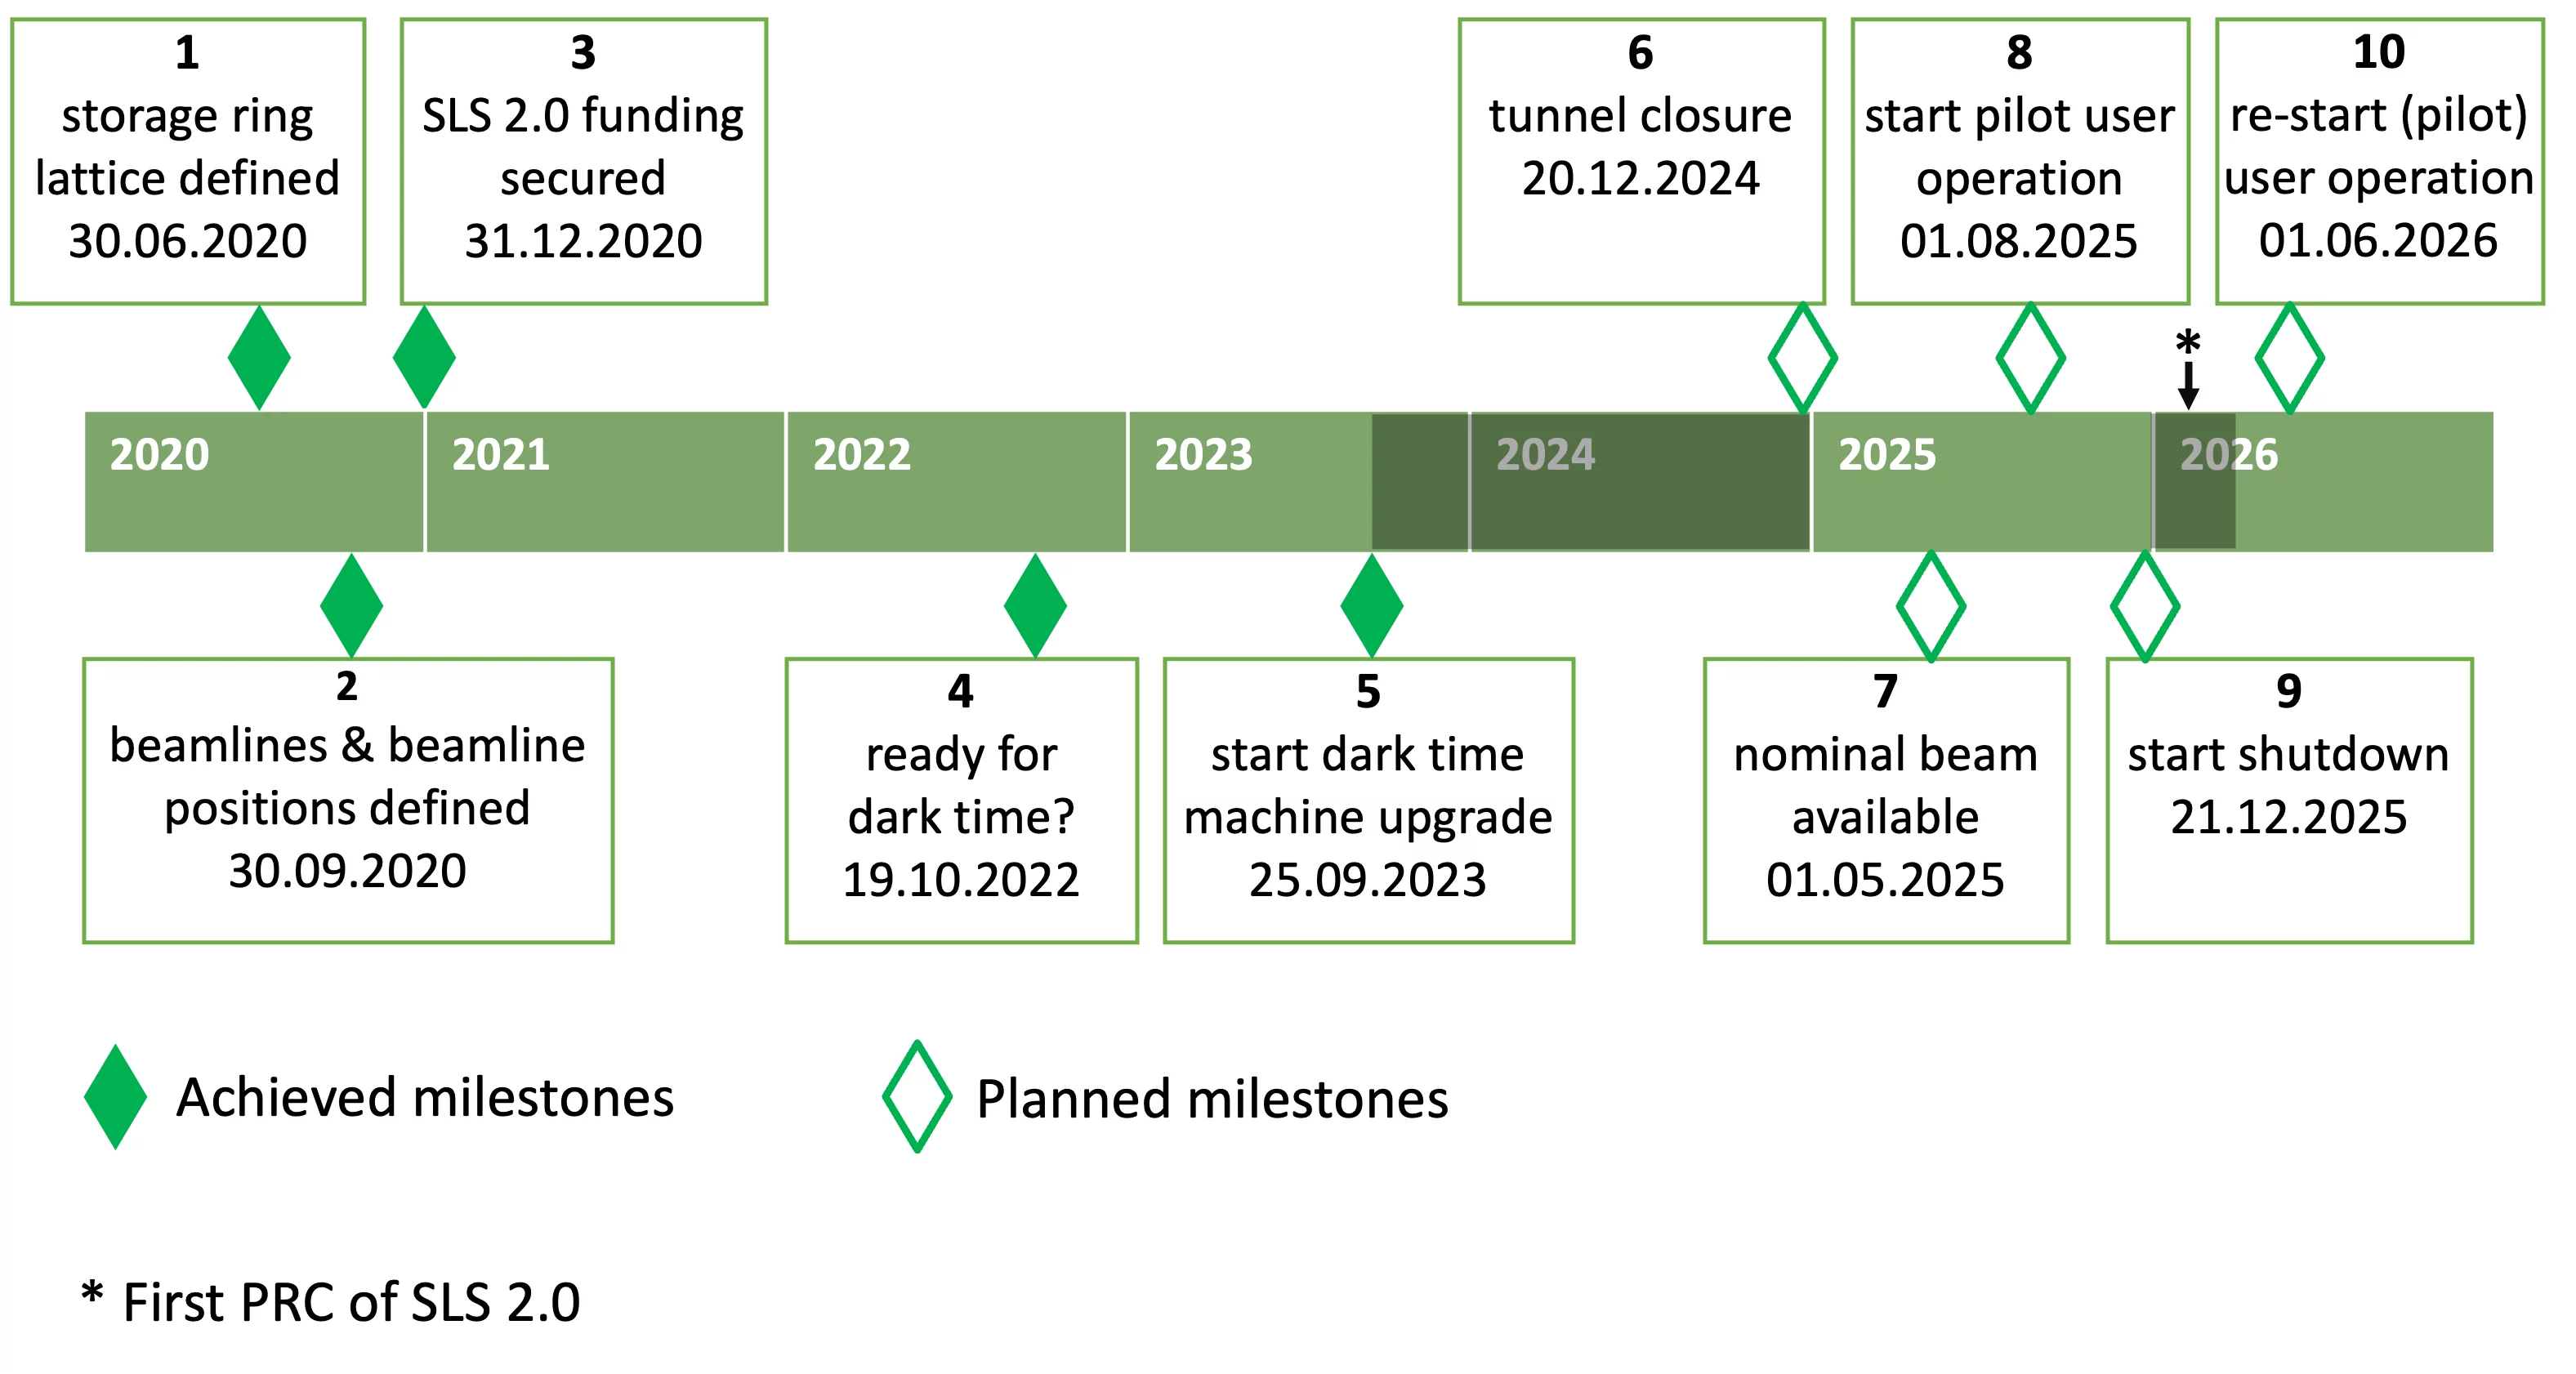 Timeline of the project, including milestones (solid green: acheived; open diamond: planned)